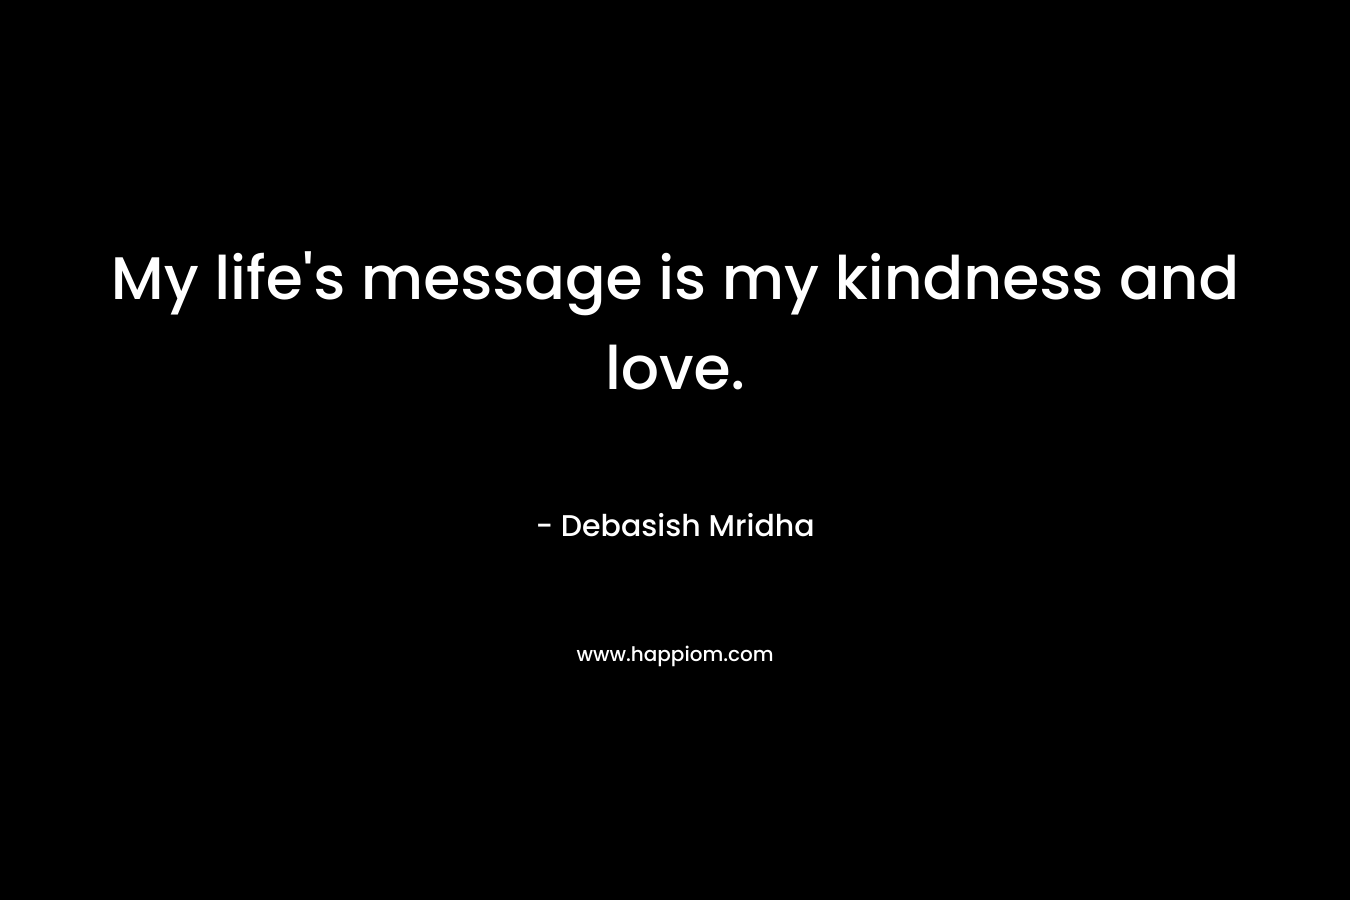 My life's message is my kindness and love.